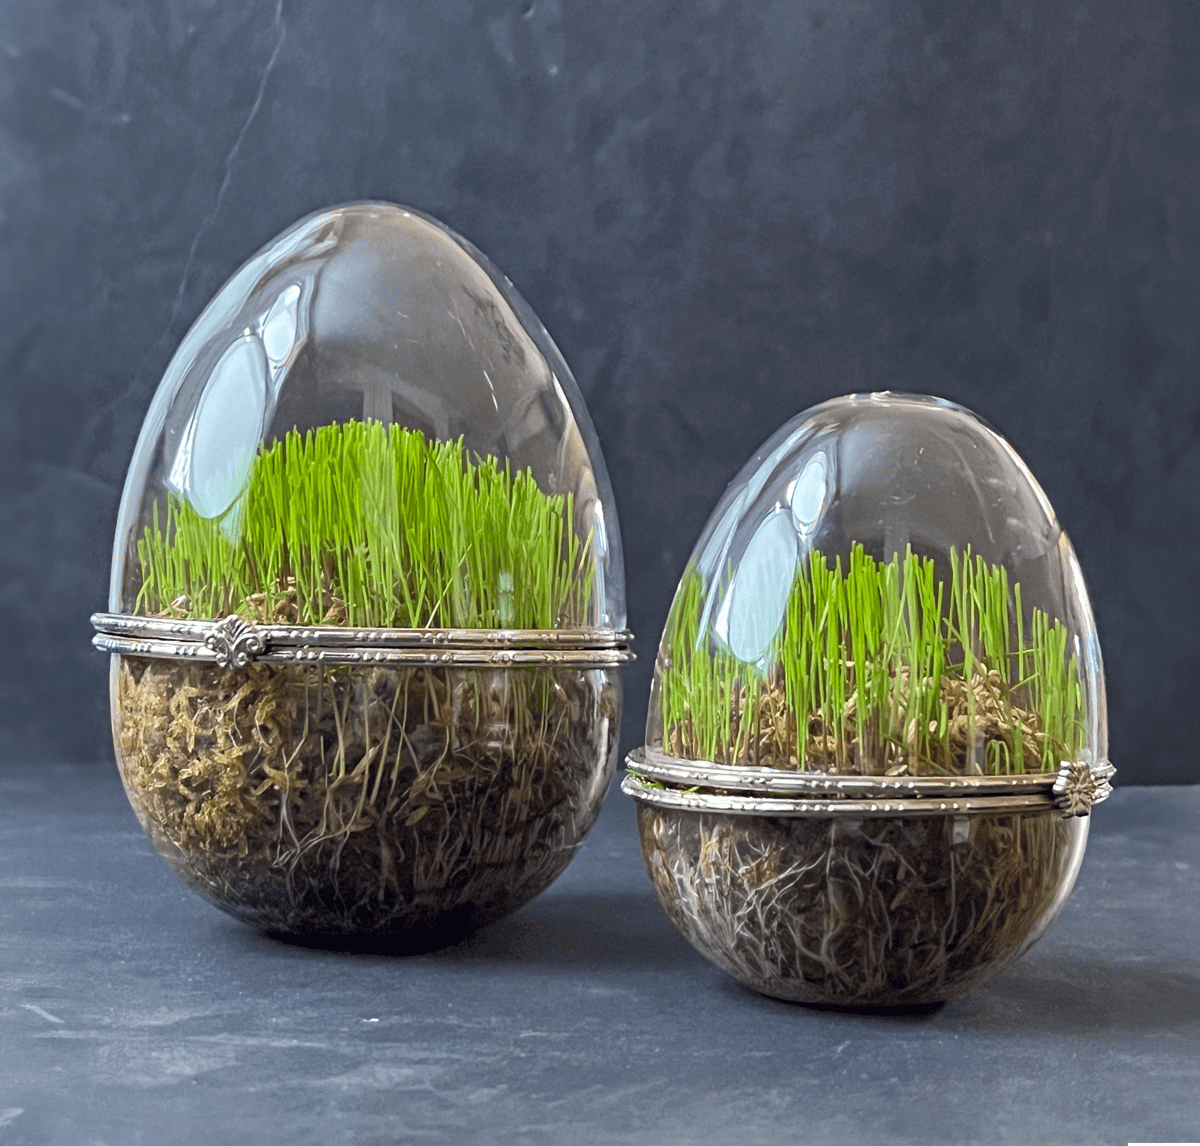 Easter grass growing in upright plastic eggs.